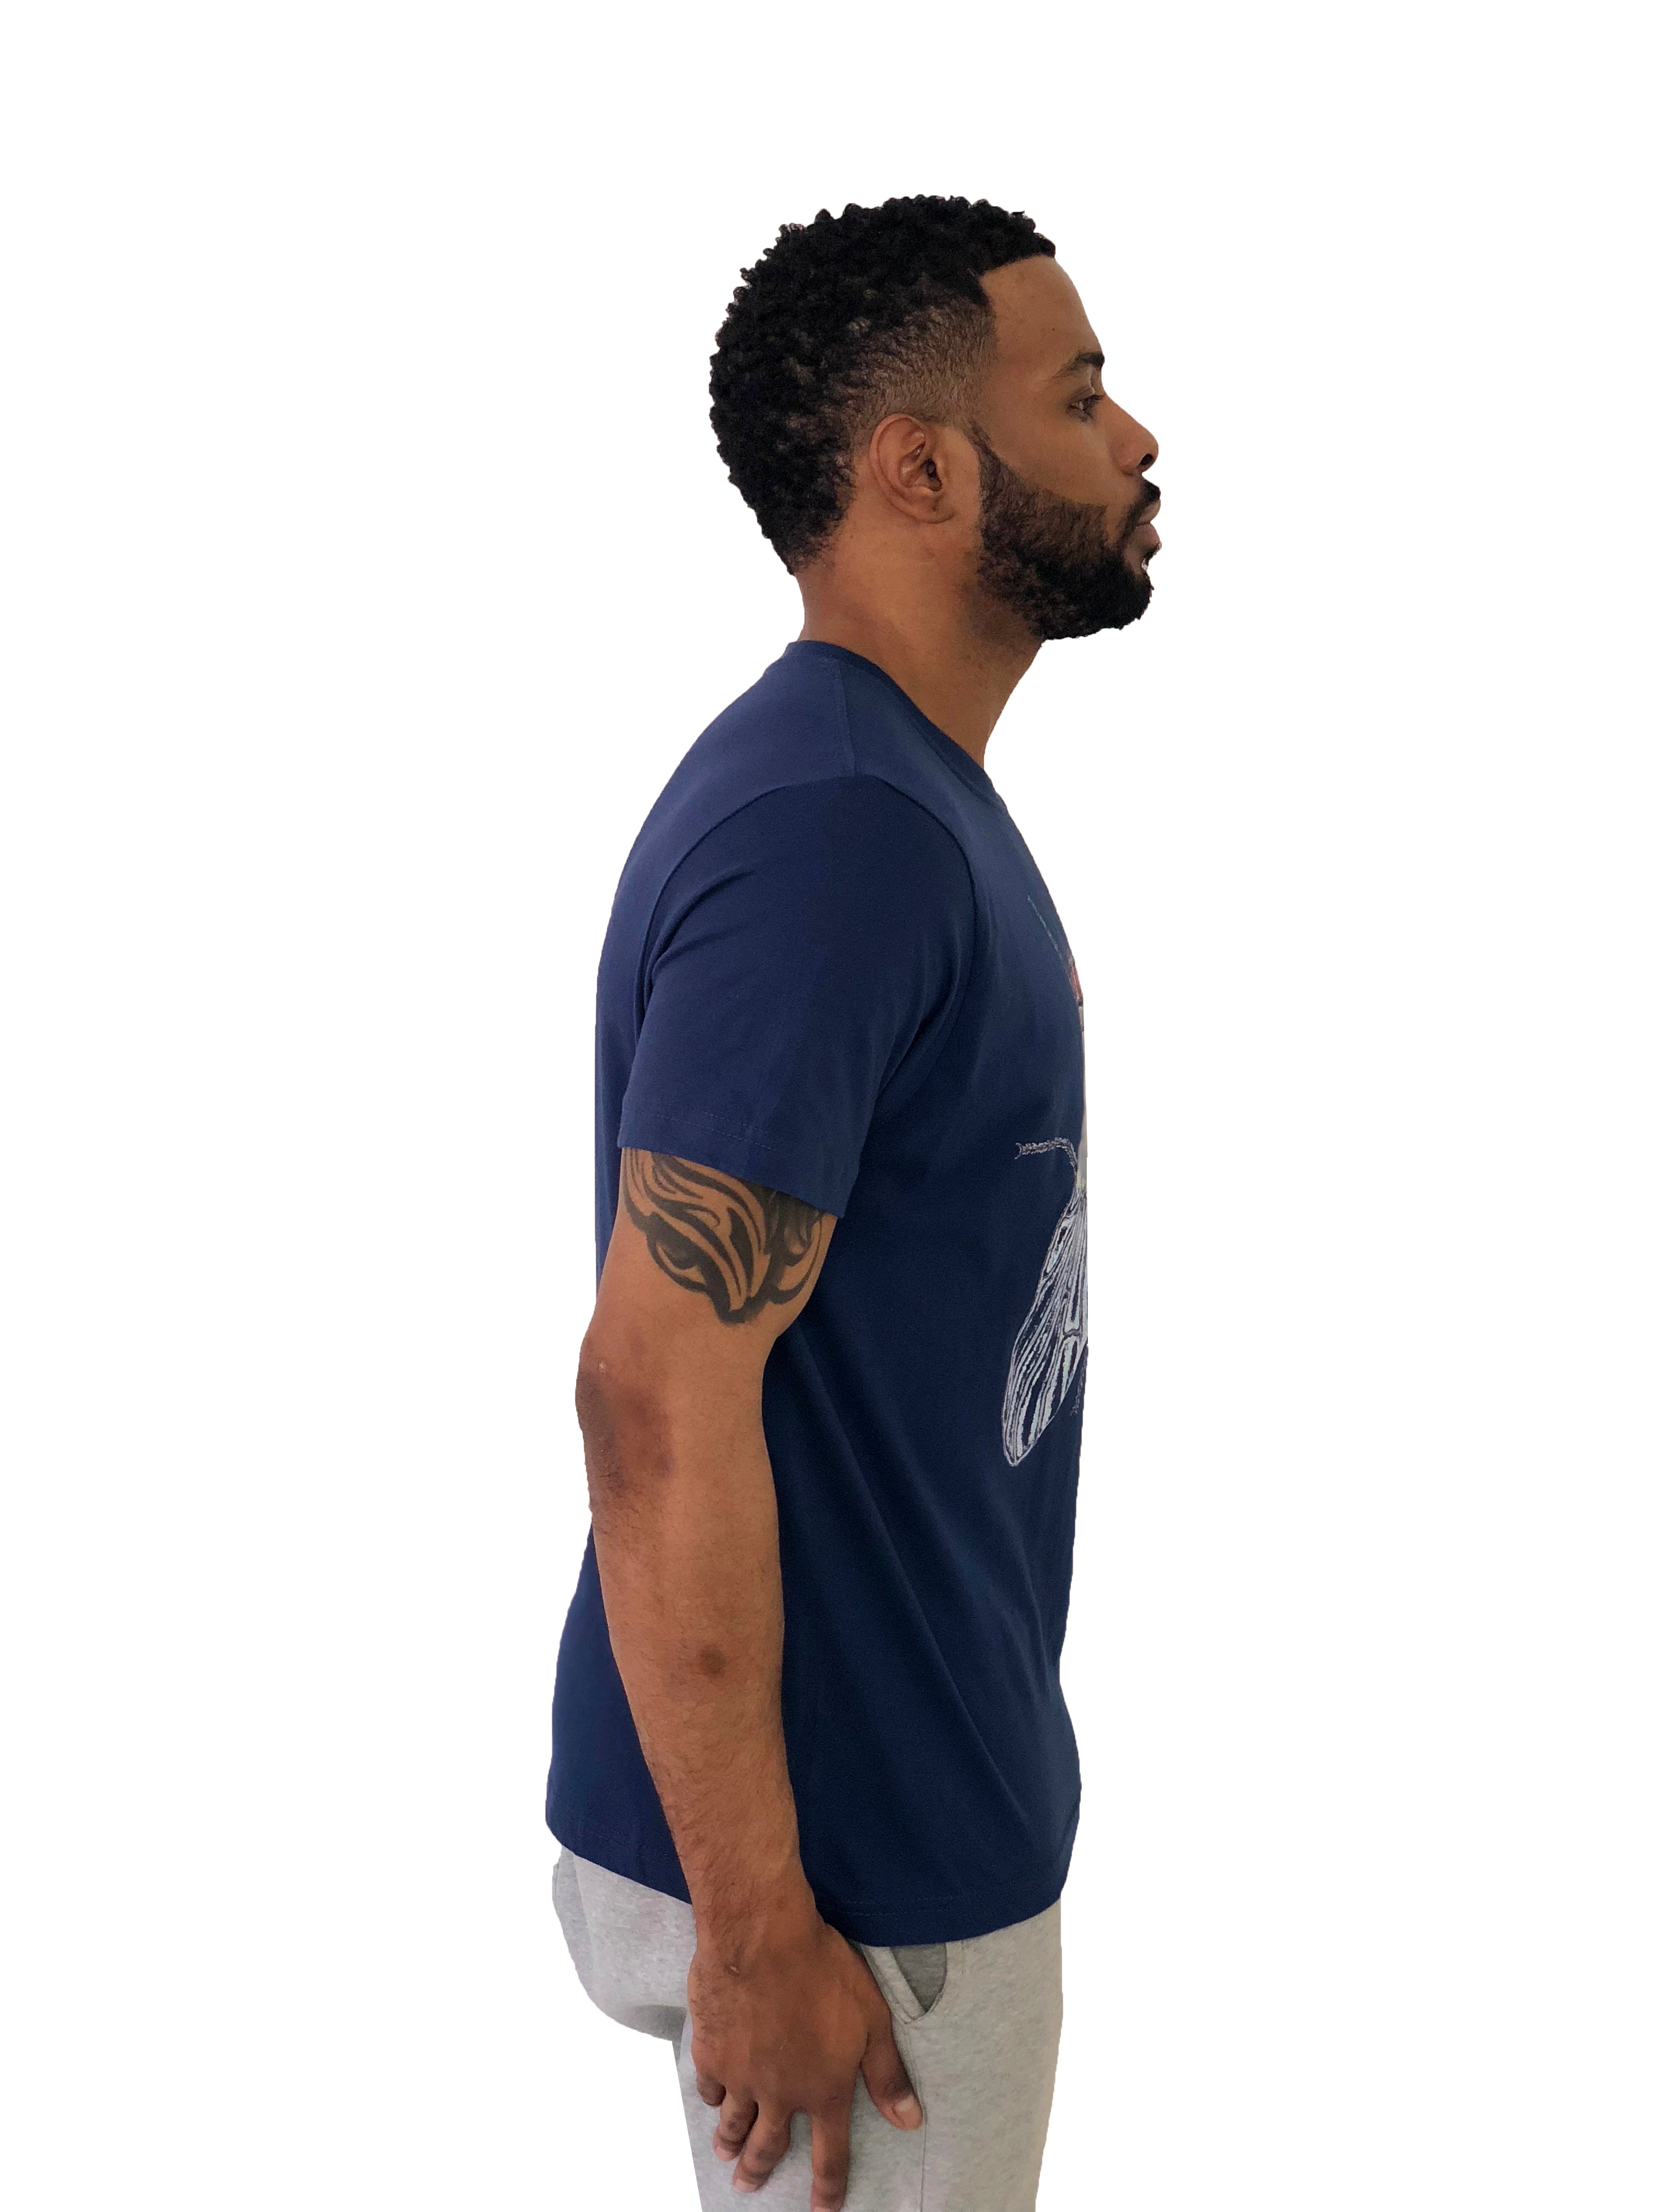 Men T-Shirt "Fly" Short Sleeved Navy Blue by iacobucyounes Italy - Brit Boss 